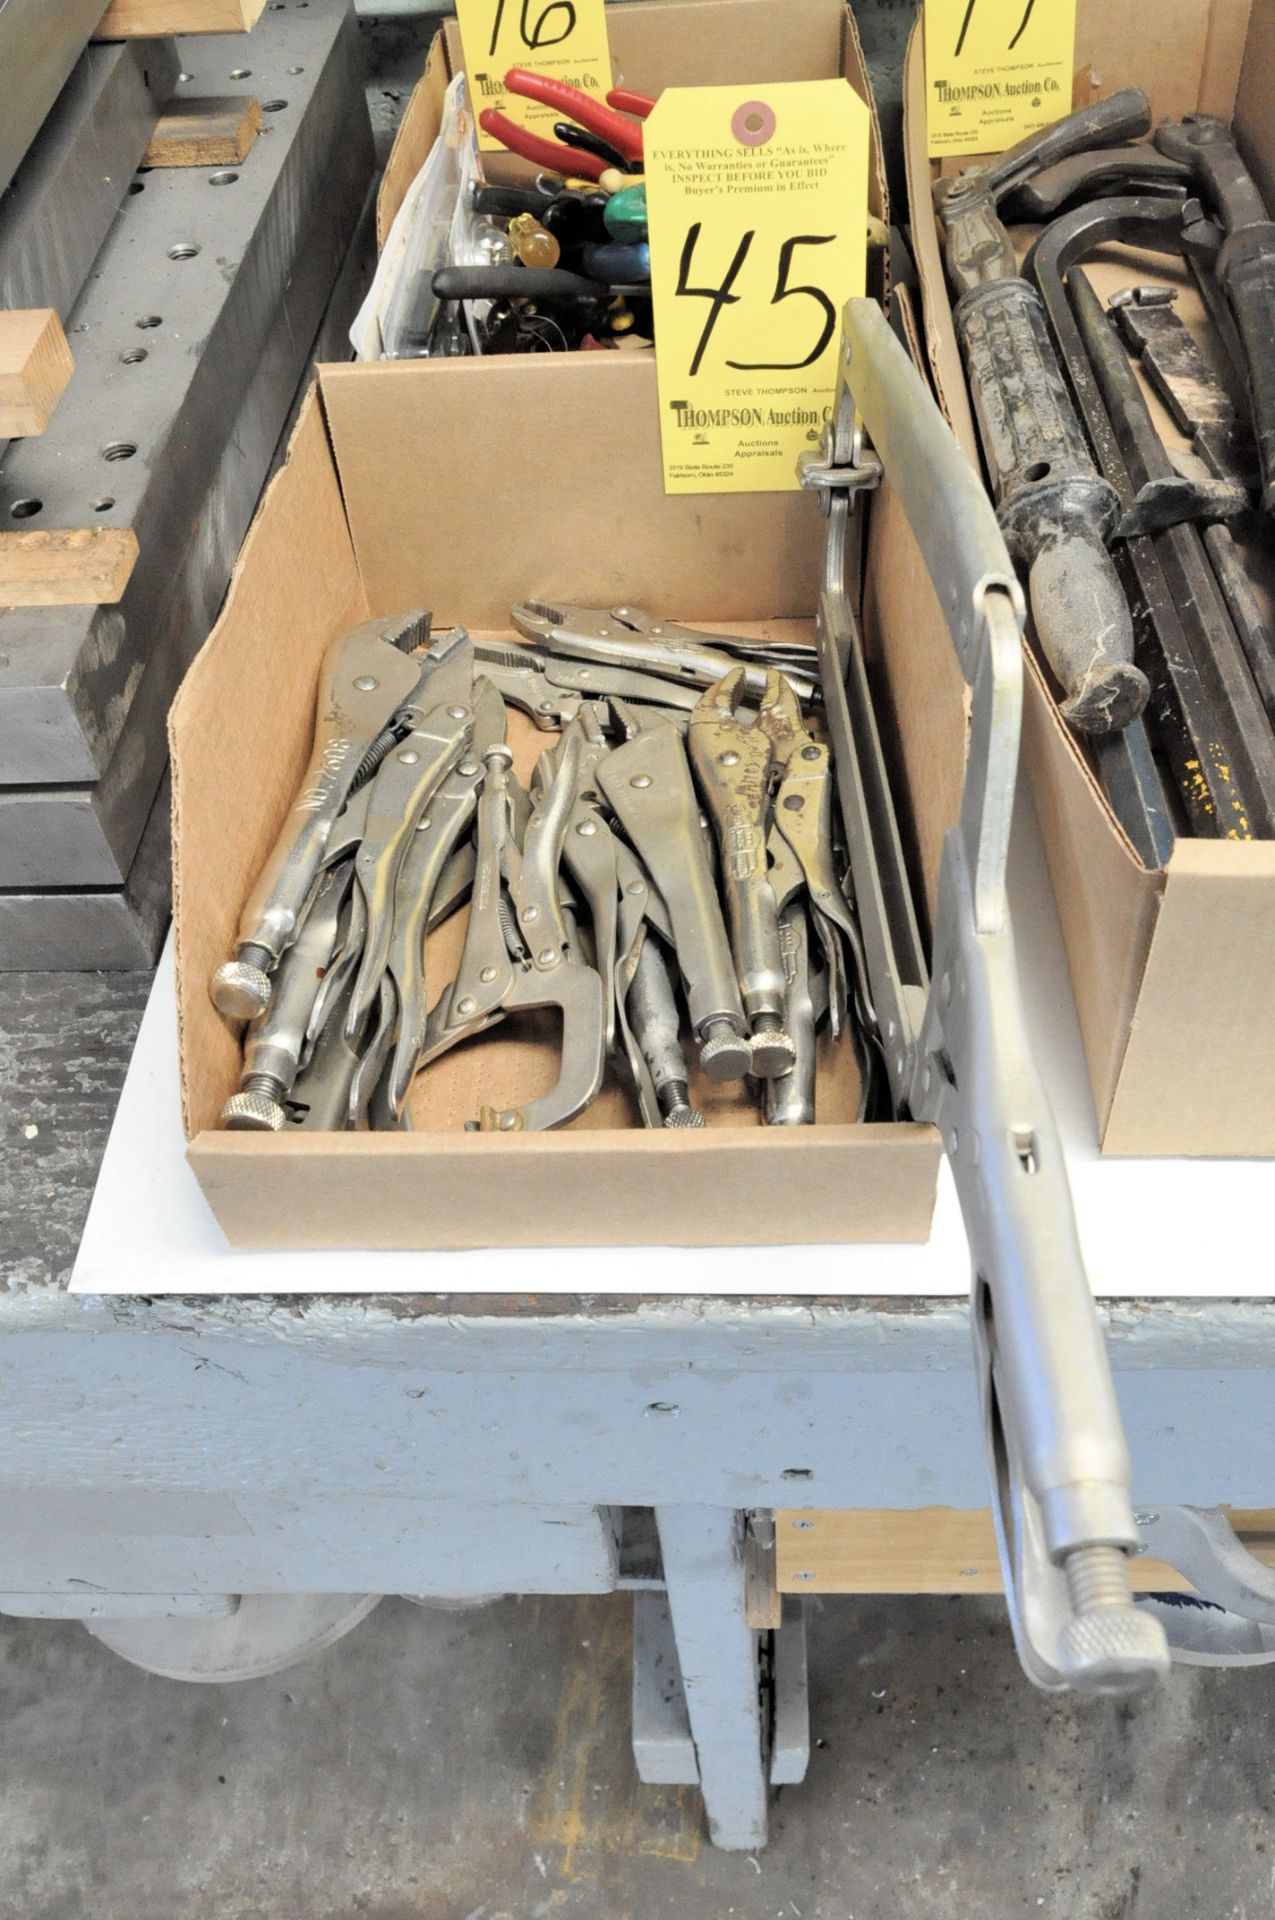 Lot-Vise Grip Clamp and Locking Pliers in (1) Box